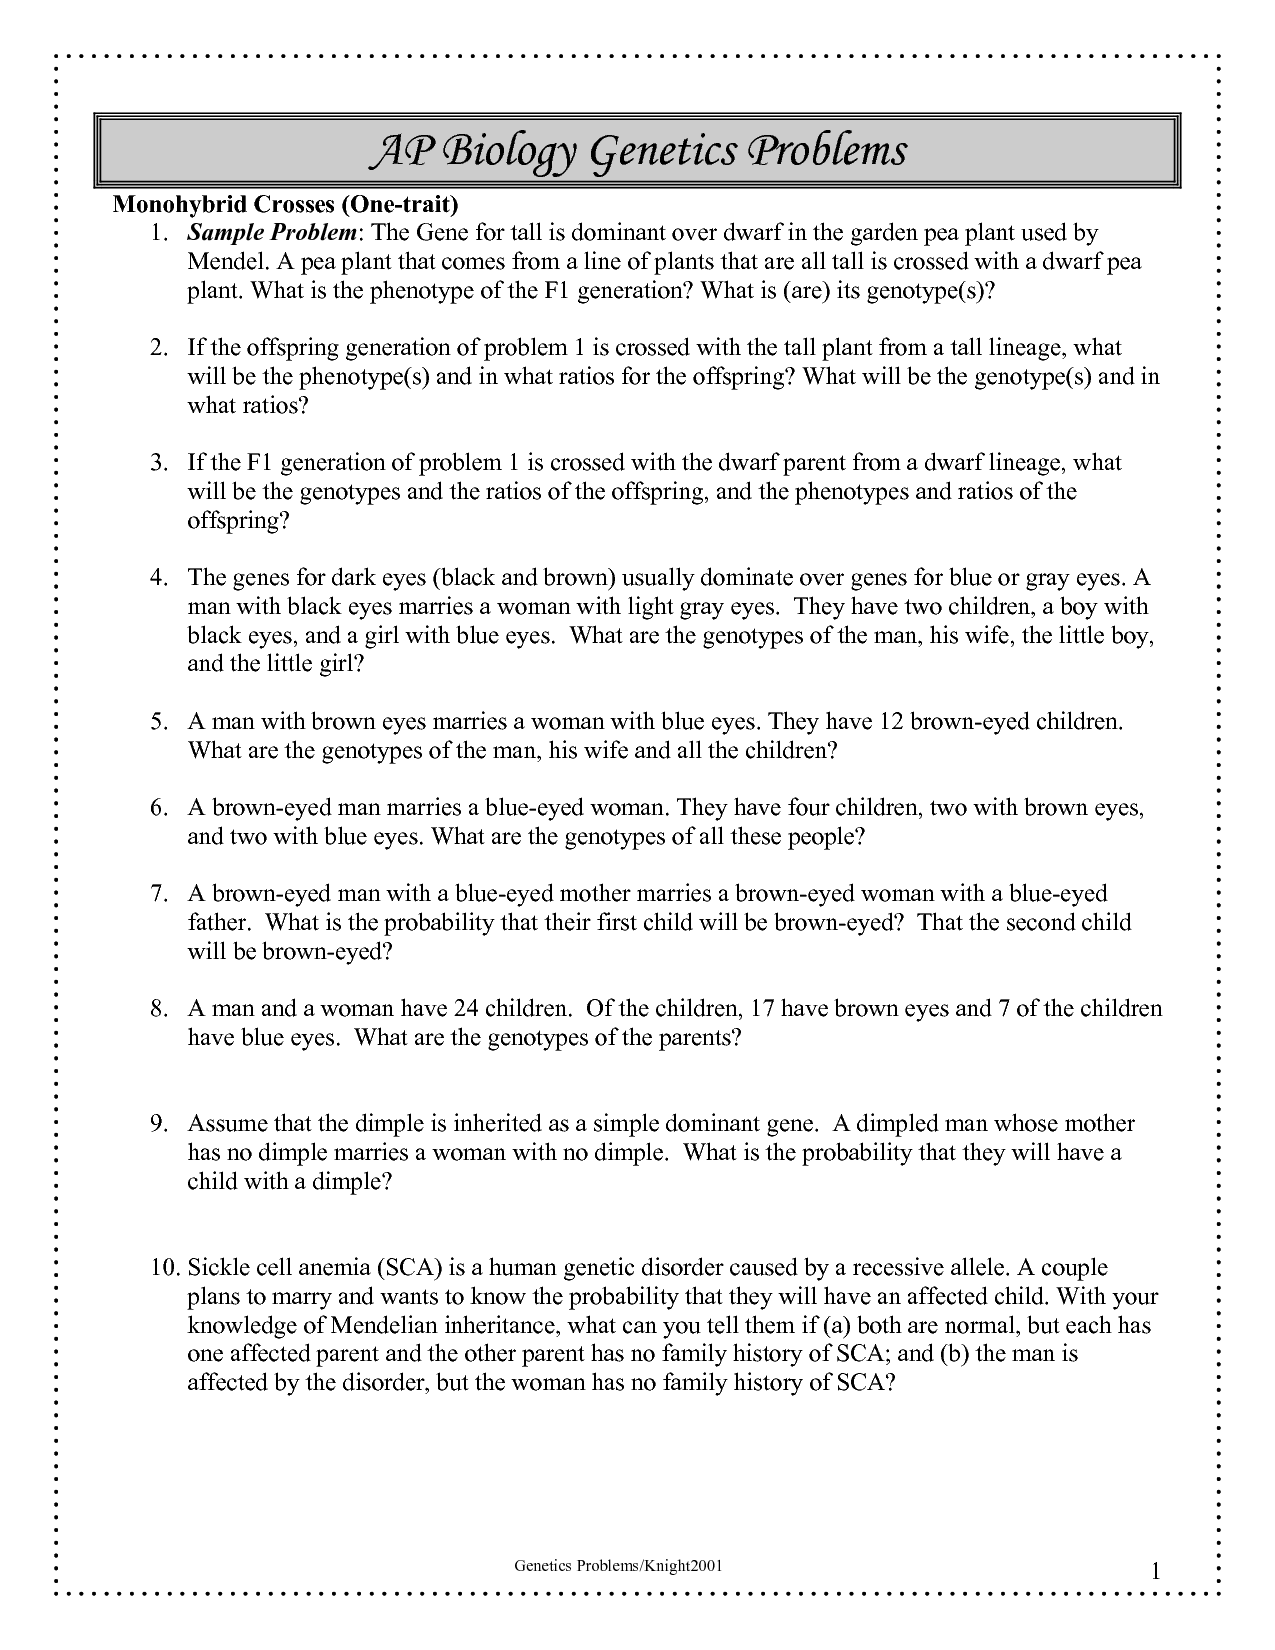 14-best-images-of-genetics-problems-worksheet-with-answer-keys-genetics-practice-problems